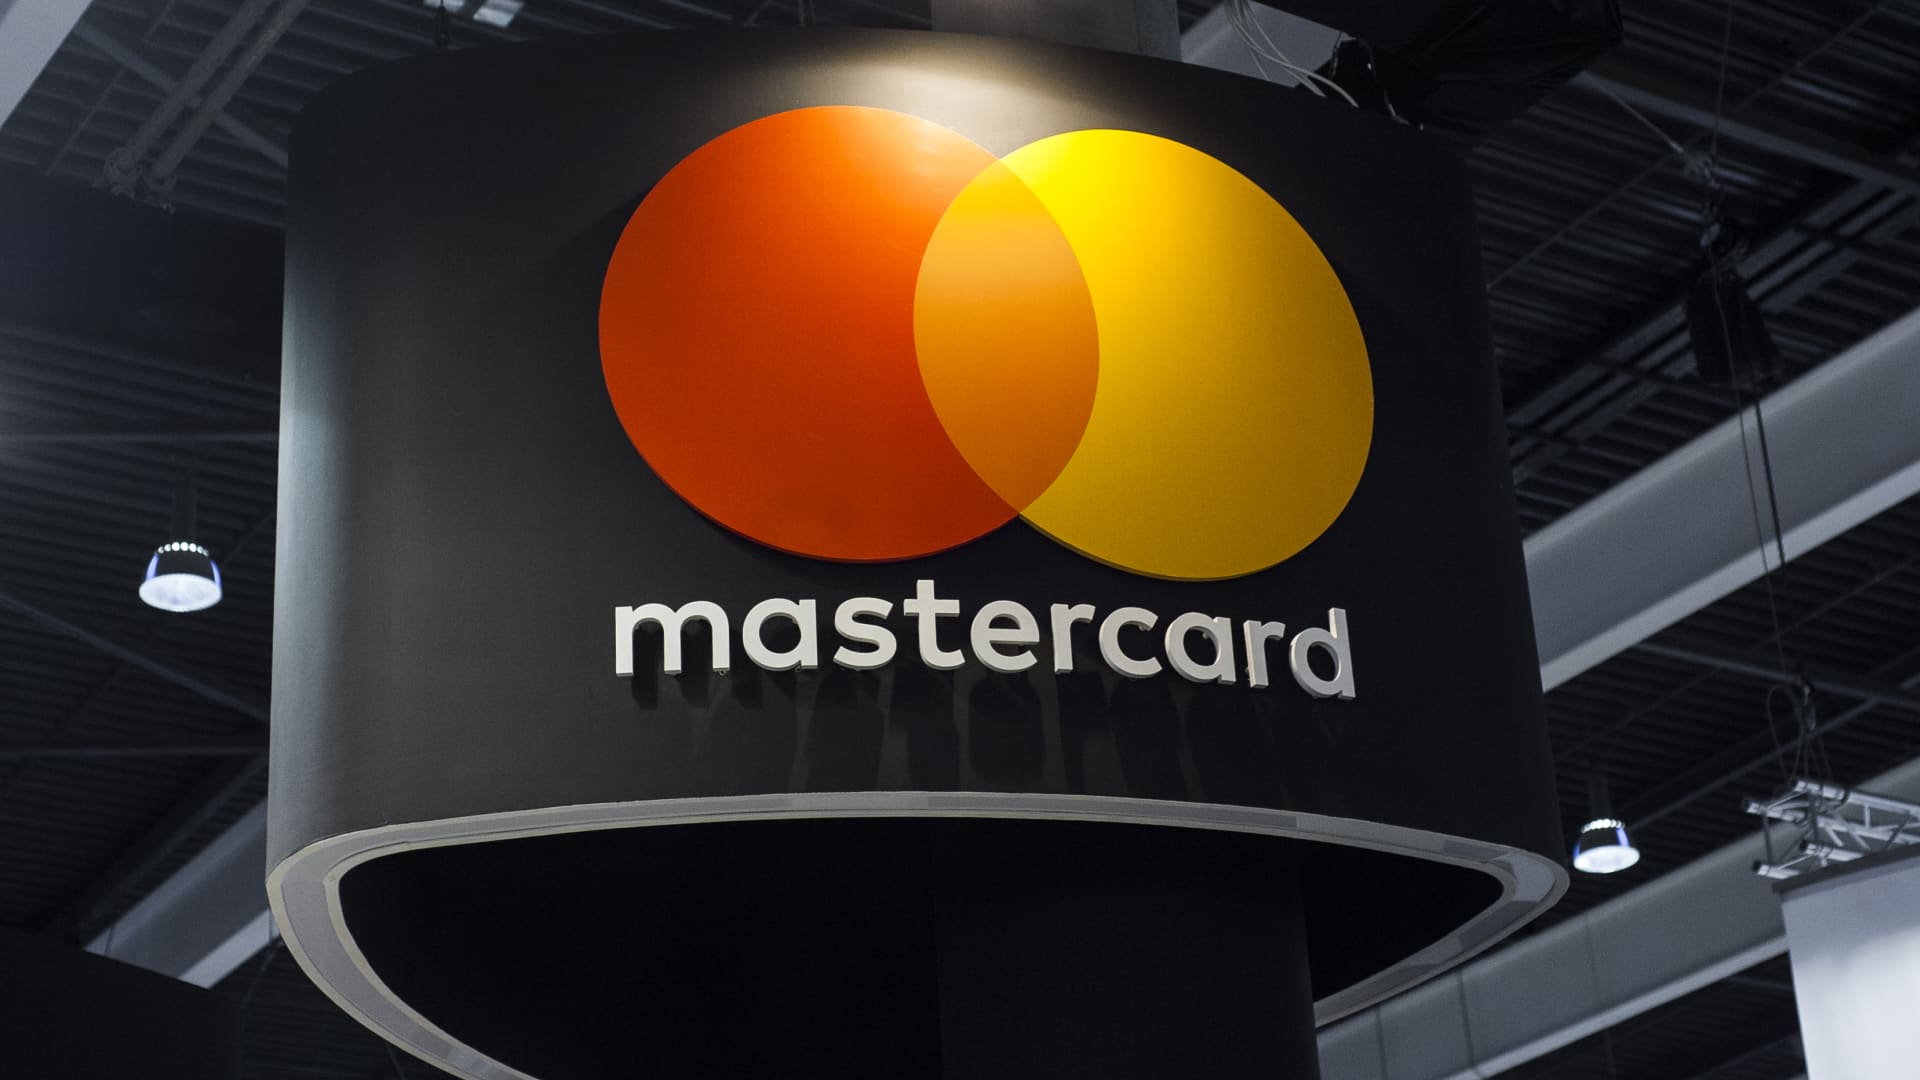 Mastercard says wide adoption of CBDCs is ‘difficult’